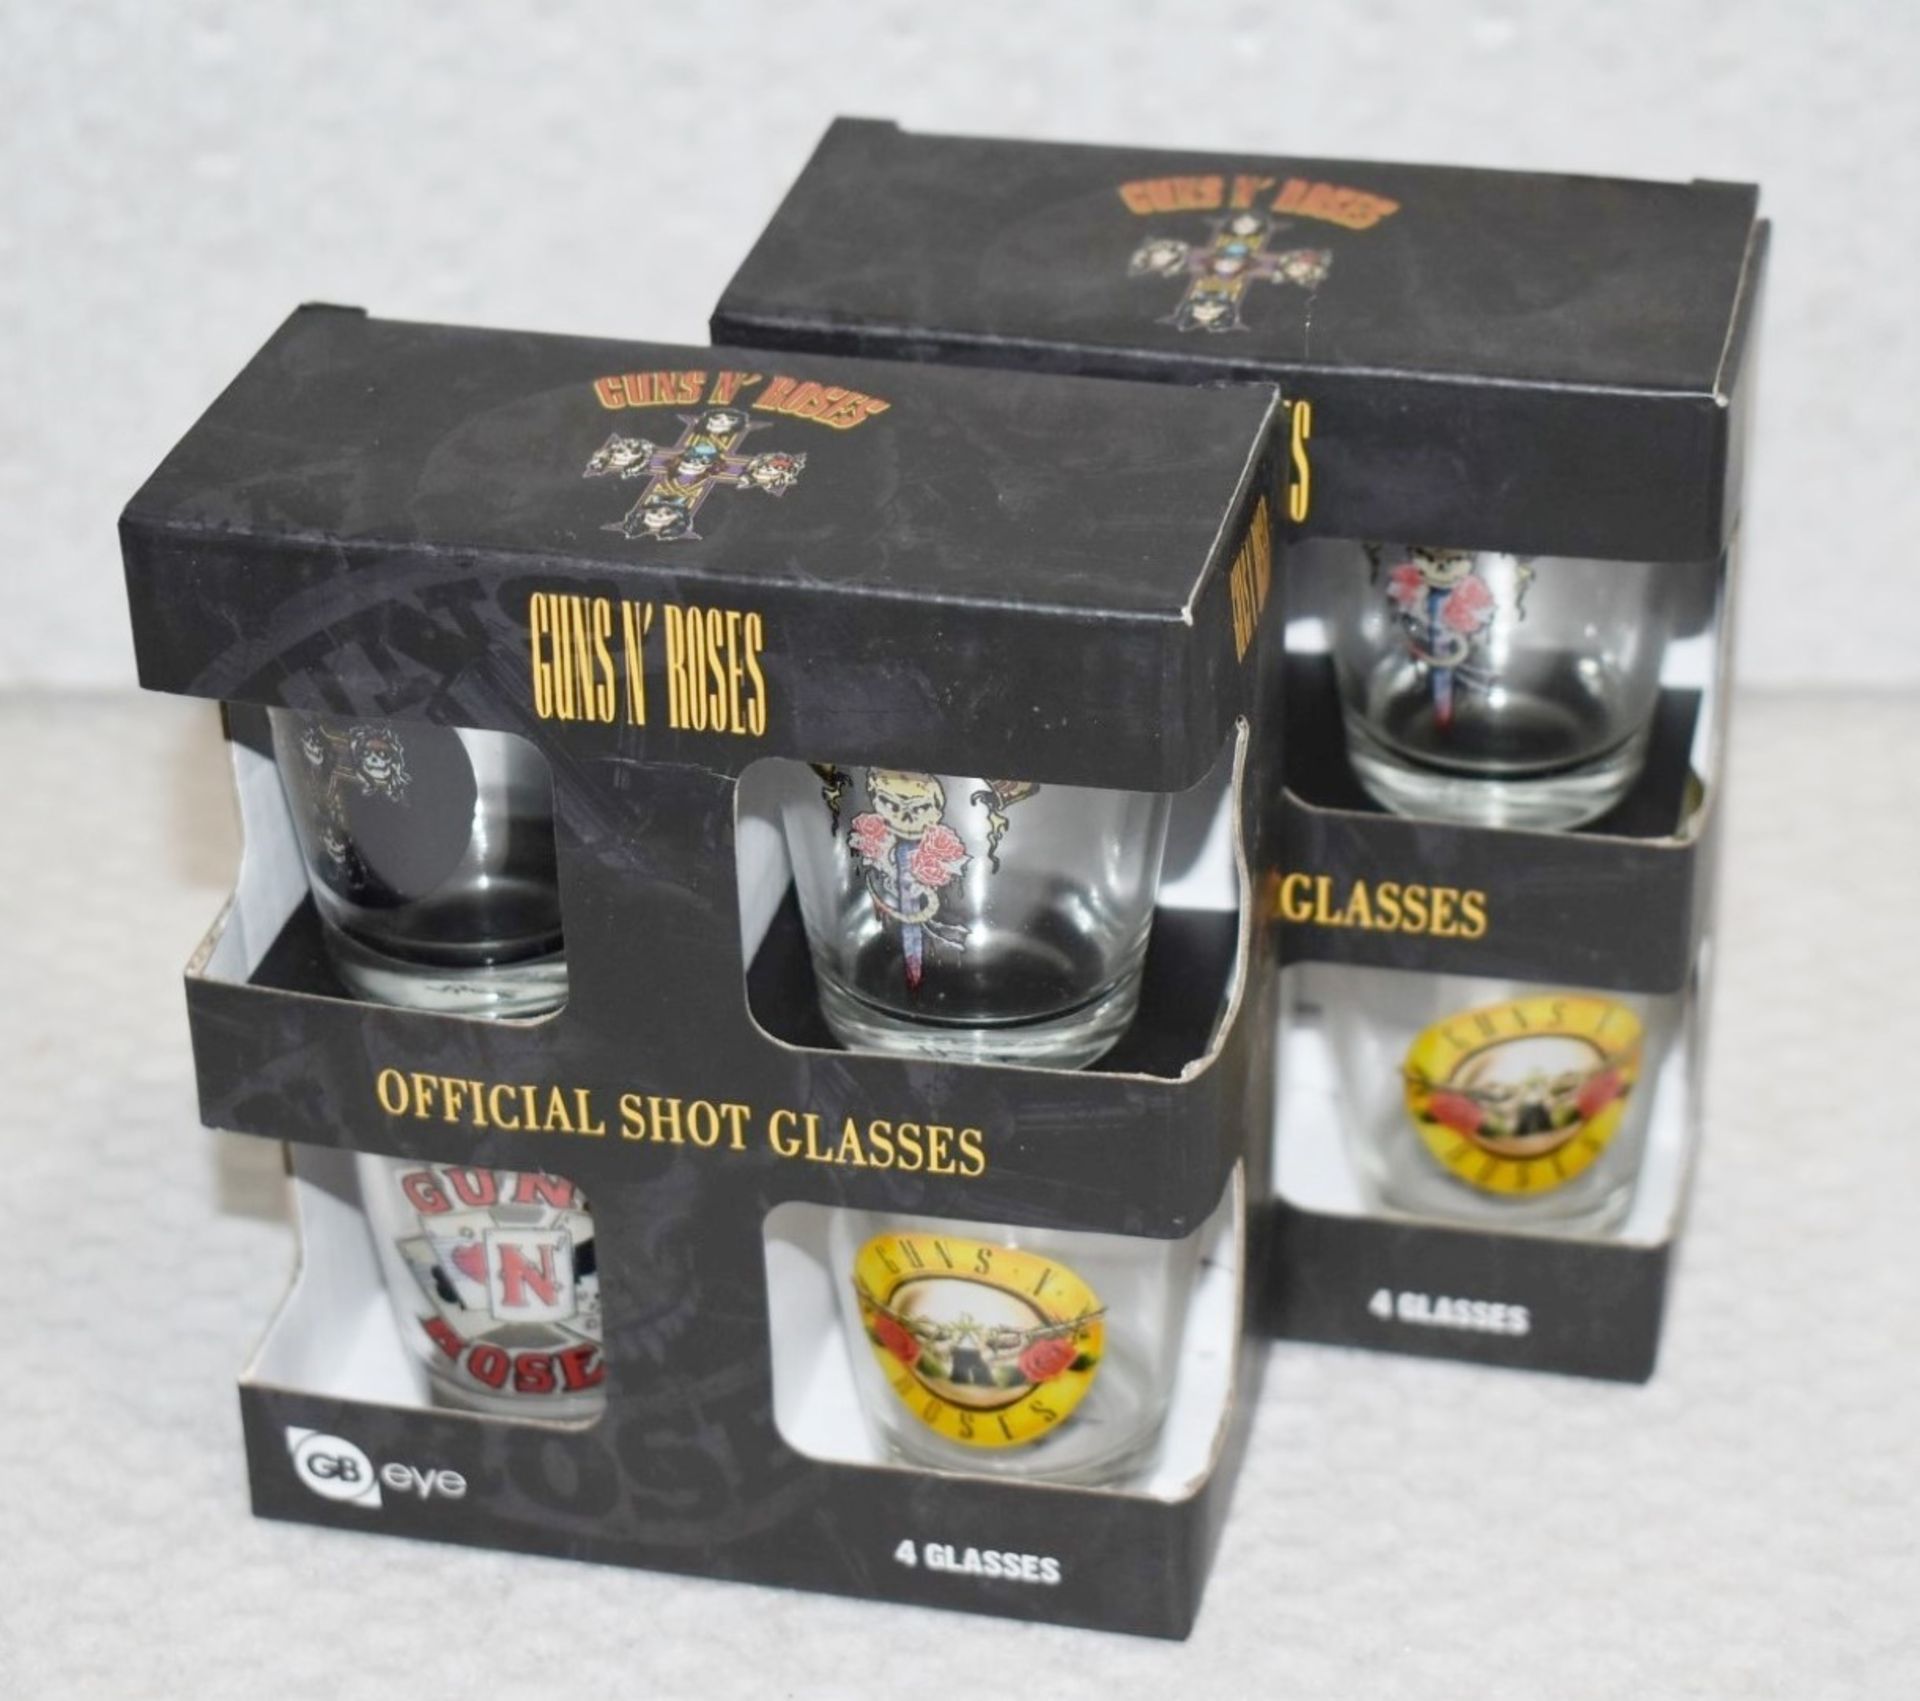 2 x Sets of Official Guns n Roses Shot Glass Gift Packs - Each Pack Contains 4 x 1oz Shot Glasses - - Image 5 of 5